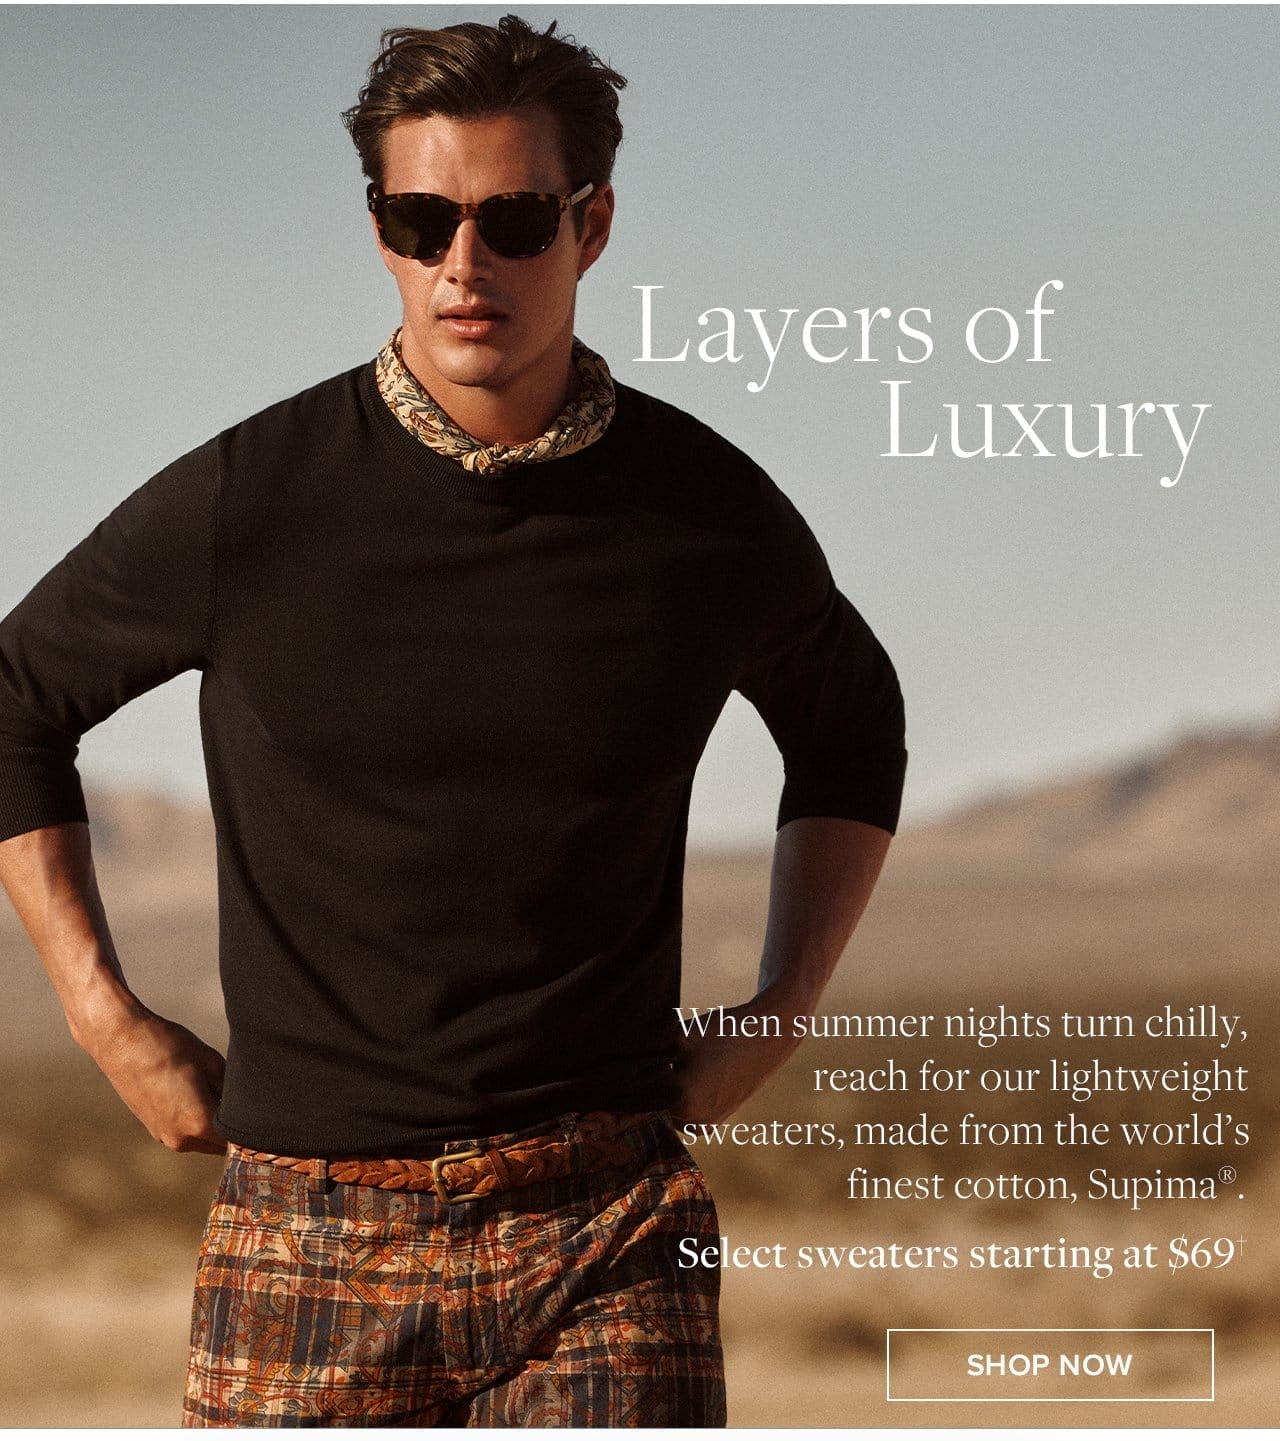 Layers of Luxury When summer nights turn chilly, reach for our lightweight sweaters, made from the world's finest cotton, Supima. Select sweaters starting at \\$69. Shop Now